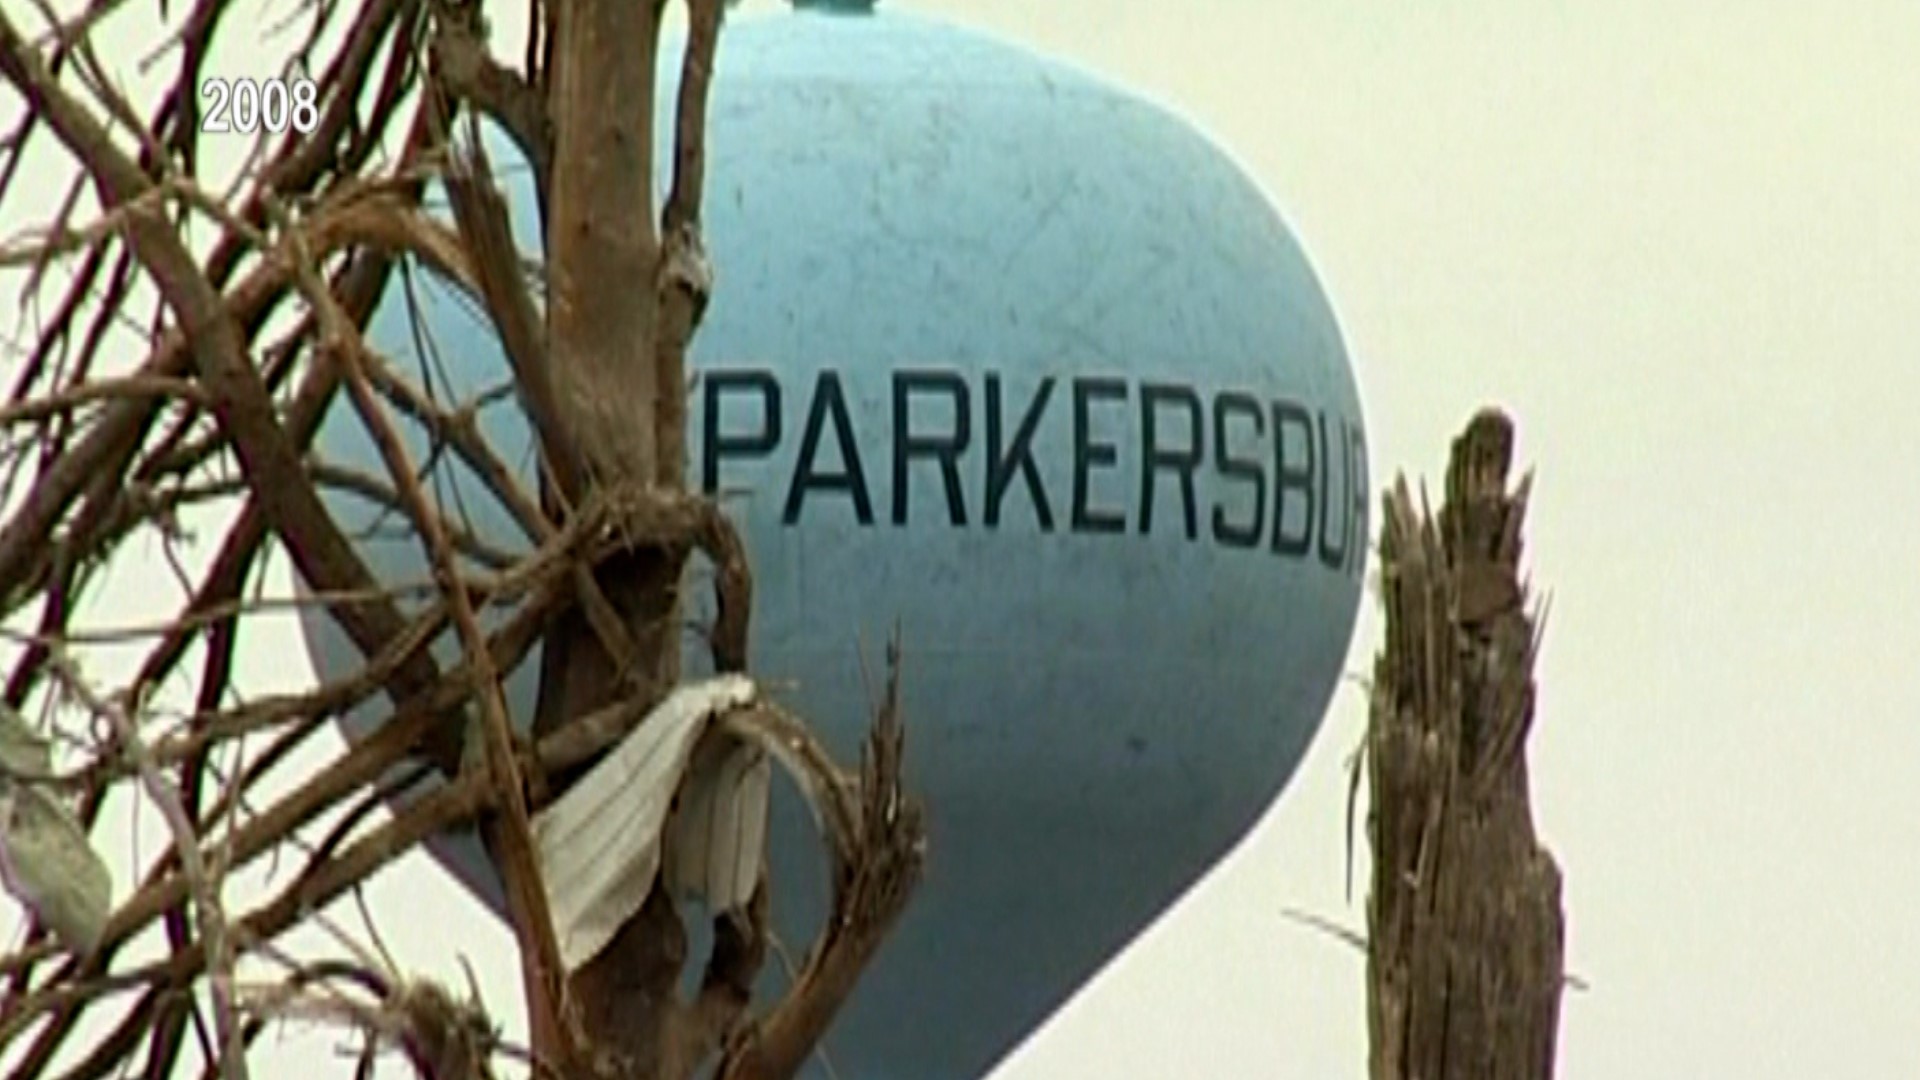 On May 25, 2008, the city of Parkersburg, Iowa was hit with the unthinkable: a devastating EF-5 tornado.